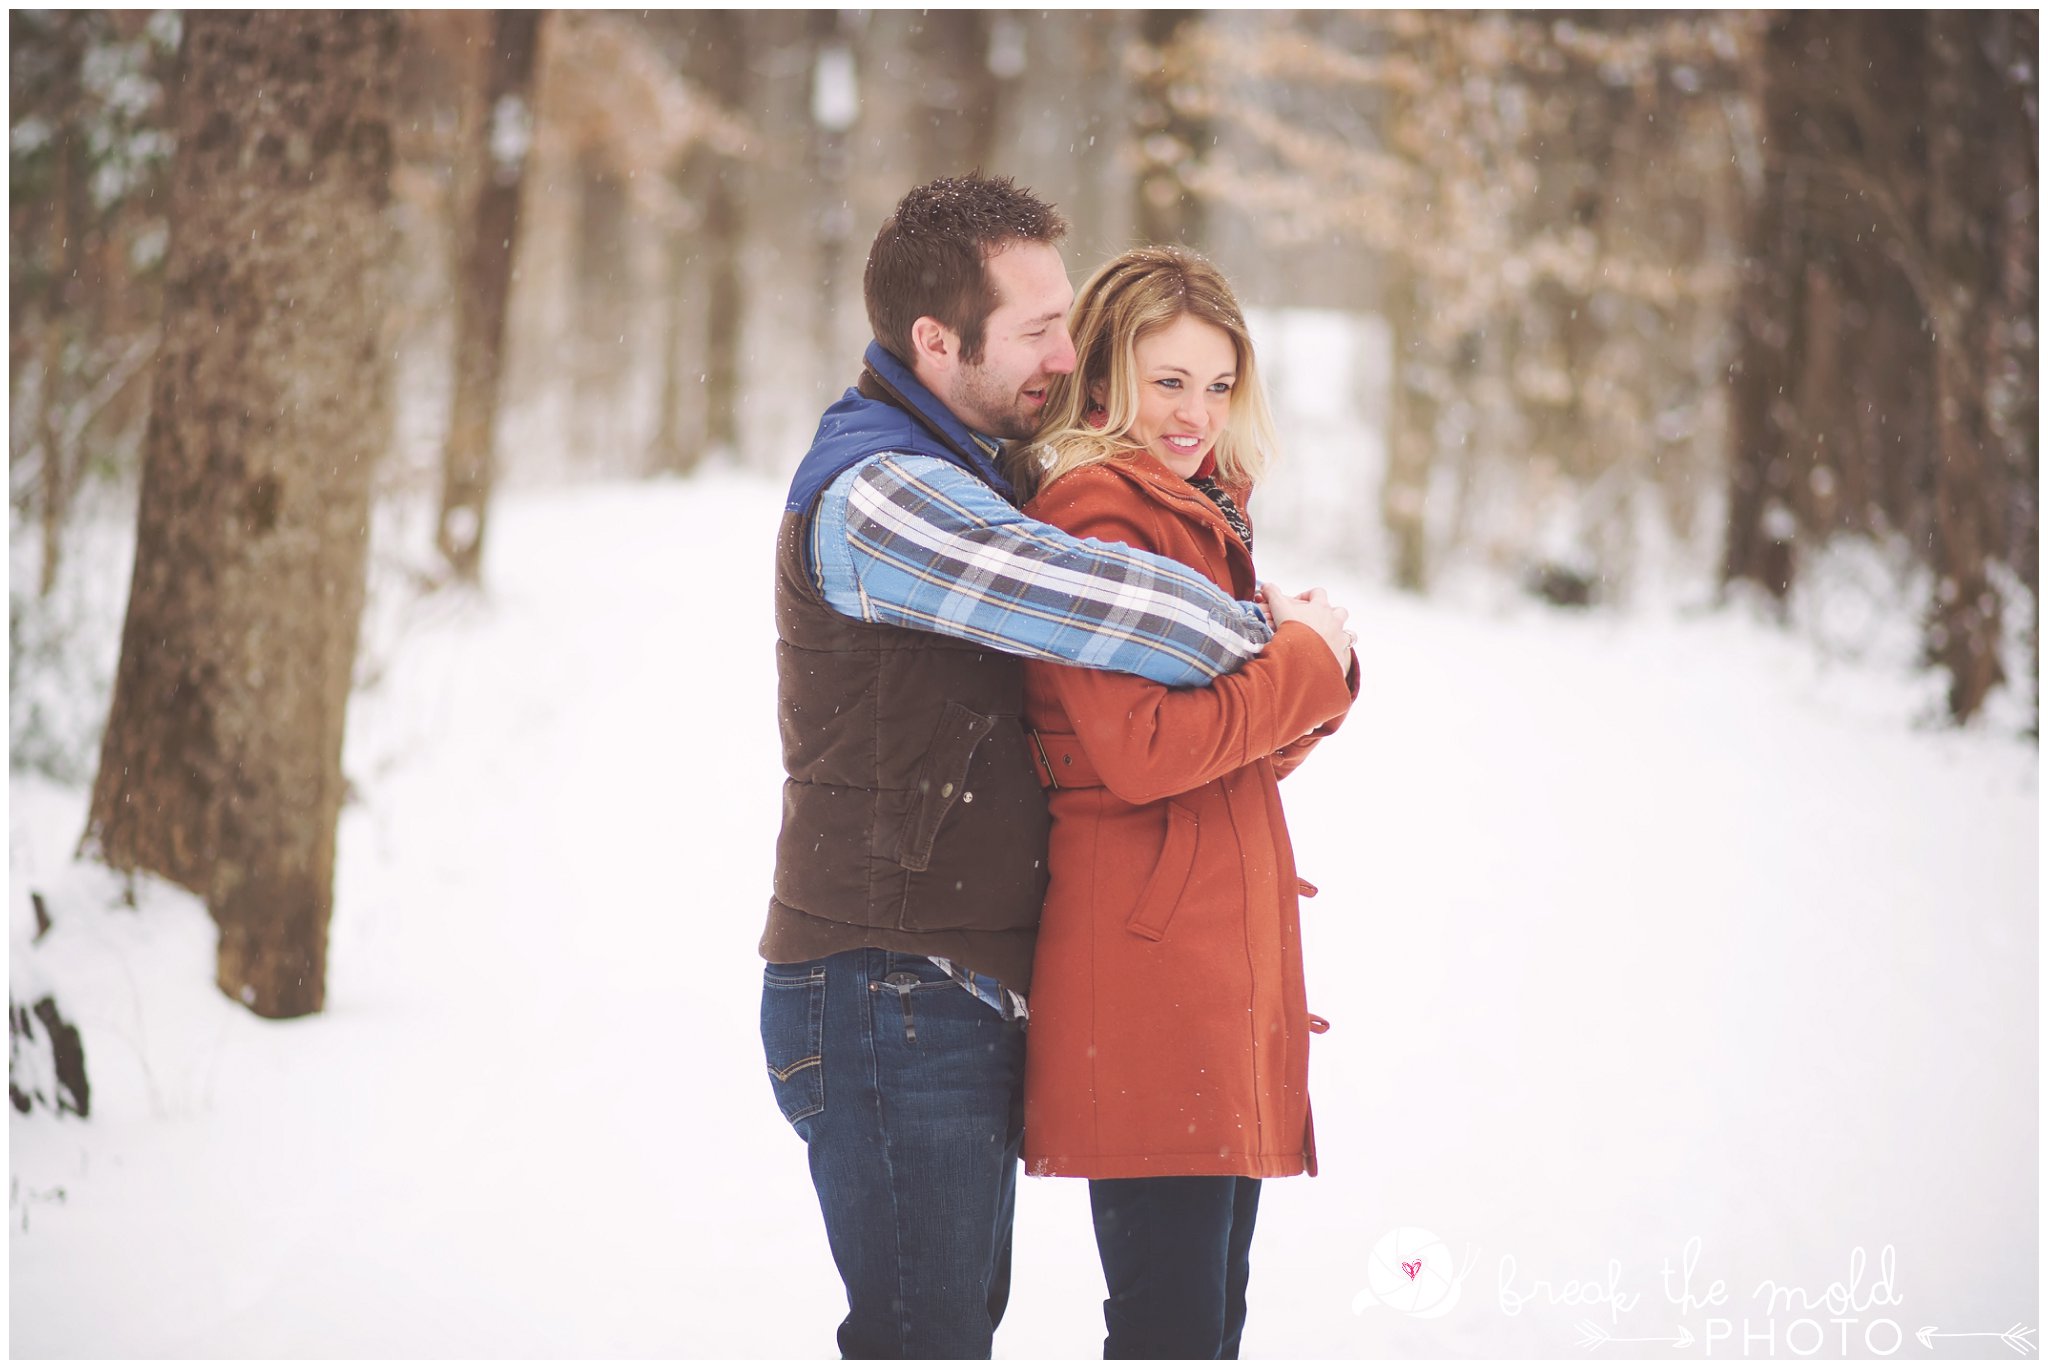 break-the-mold-photo-snowy-day-engagement-photos-knoxville-tn-tennessee-snow-day-pictures-winter-outdoor-unique-family_1495.jpg